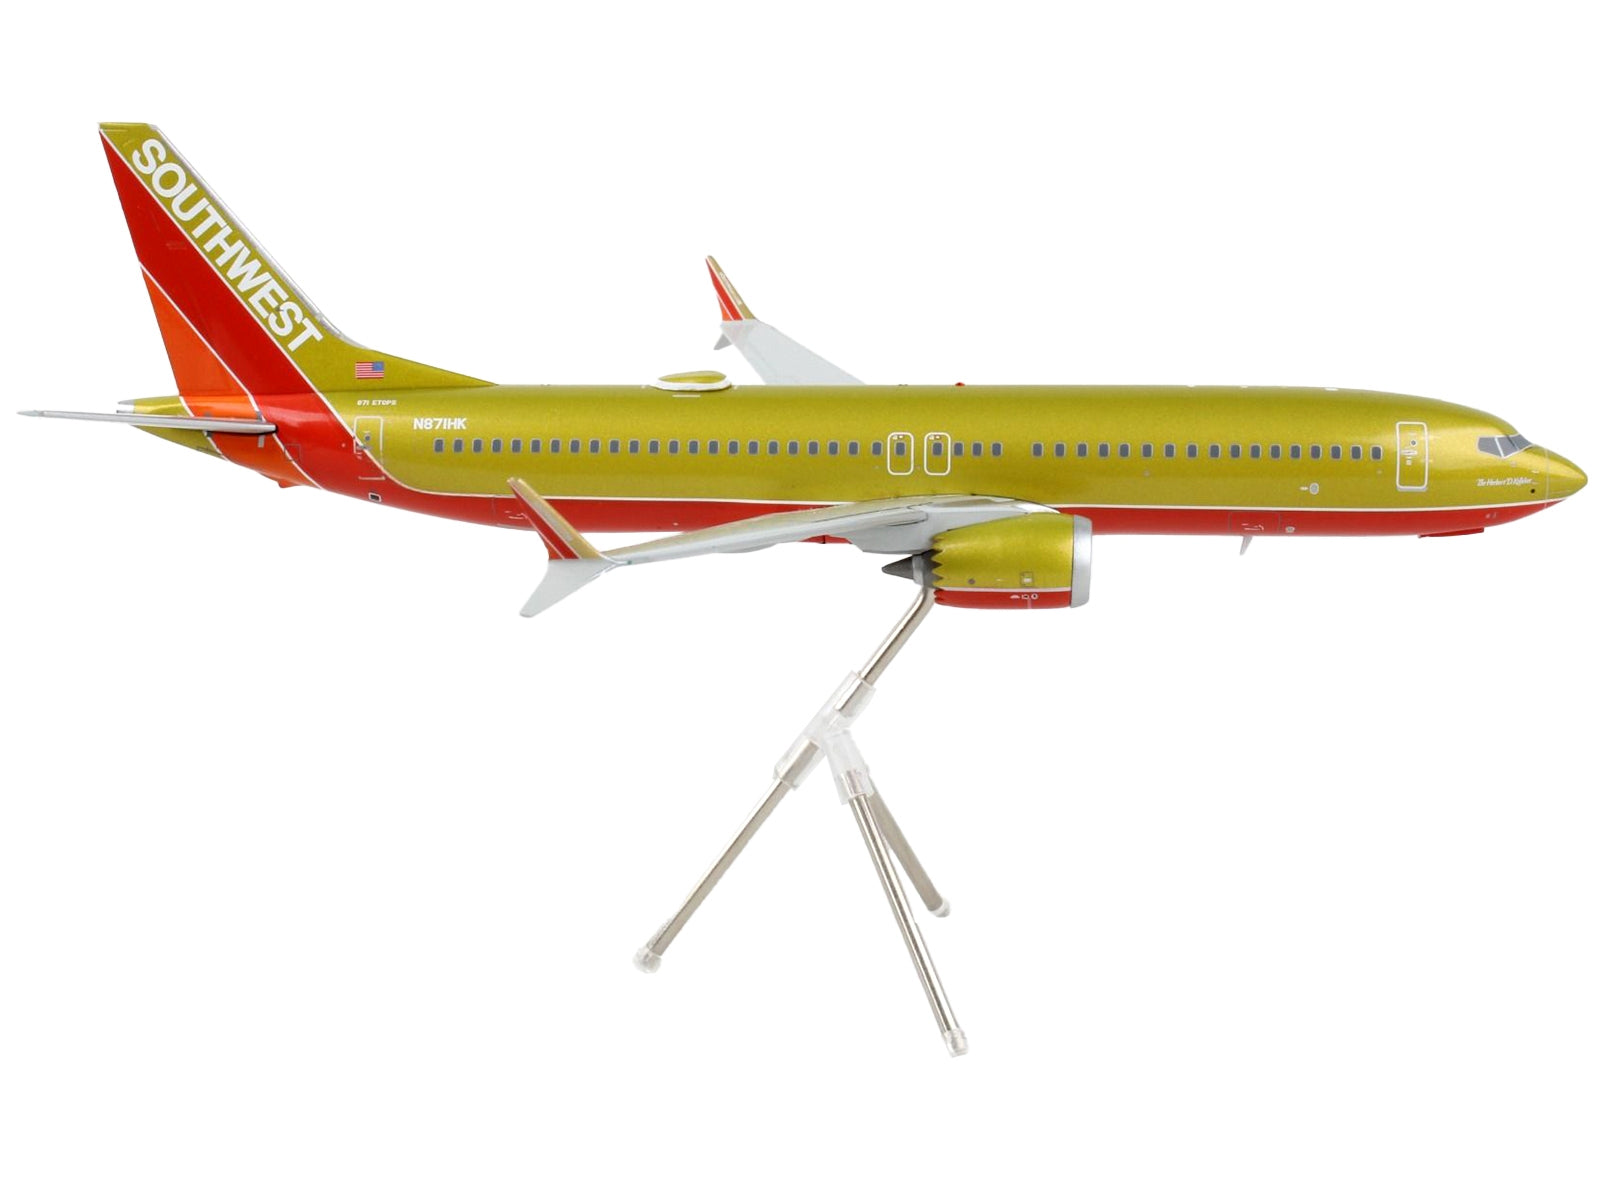 Boeing 737 MAX 8 Commercial Aircraft "Southwest Airlines" Gold and Red "Gemini 200" Series 1/200 Diecast Model Airplane by GeminiJets